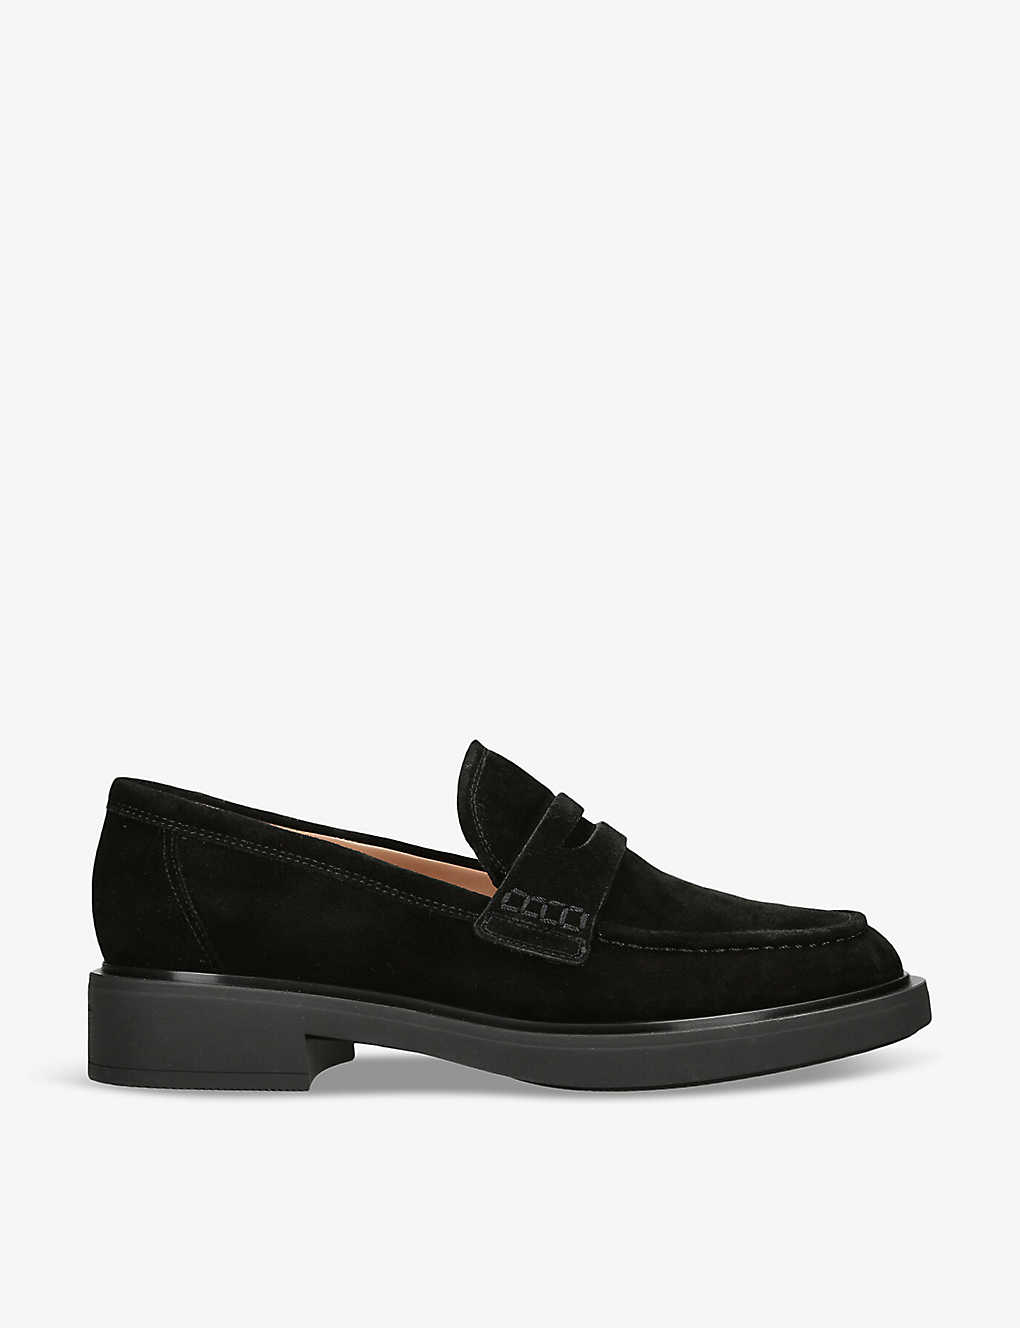 Gianvito Rossi Harris Penny-strap Suede Loafers In Black